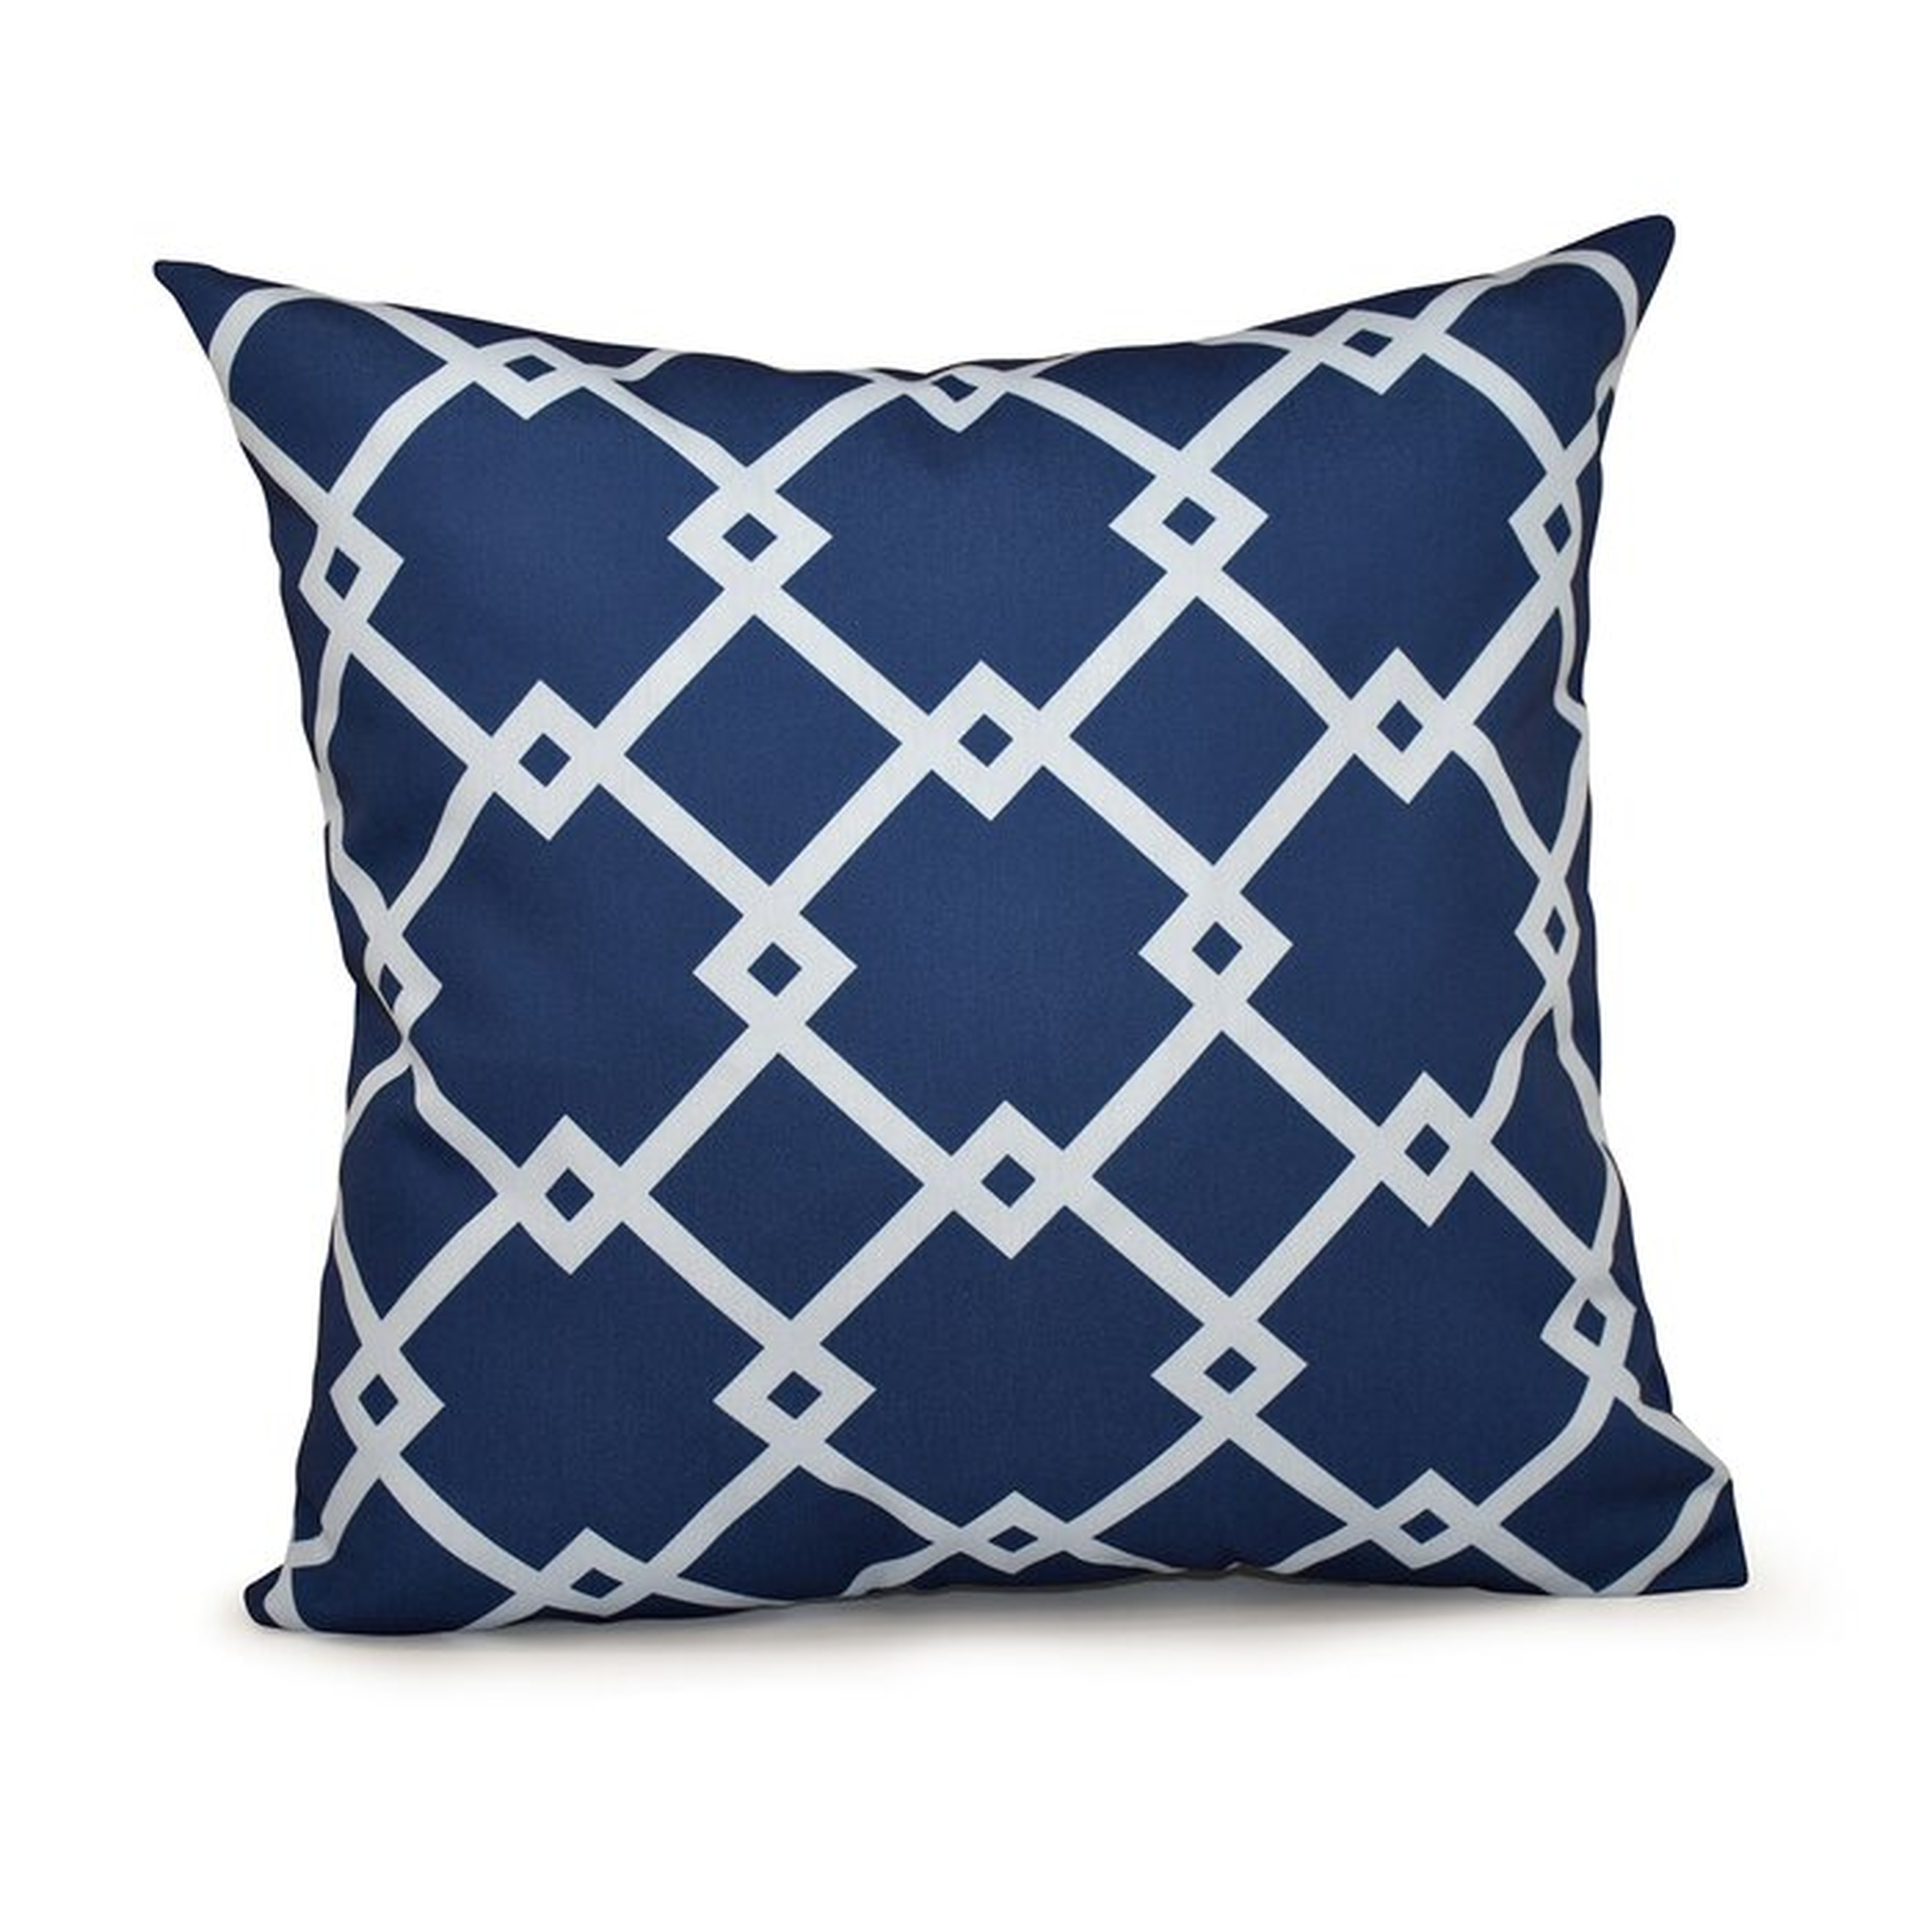 Trellis Square Pillow Cover and Insert - Wayfair